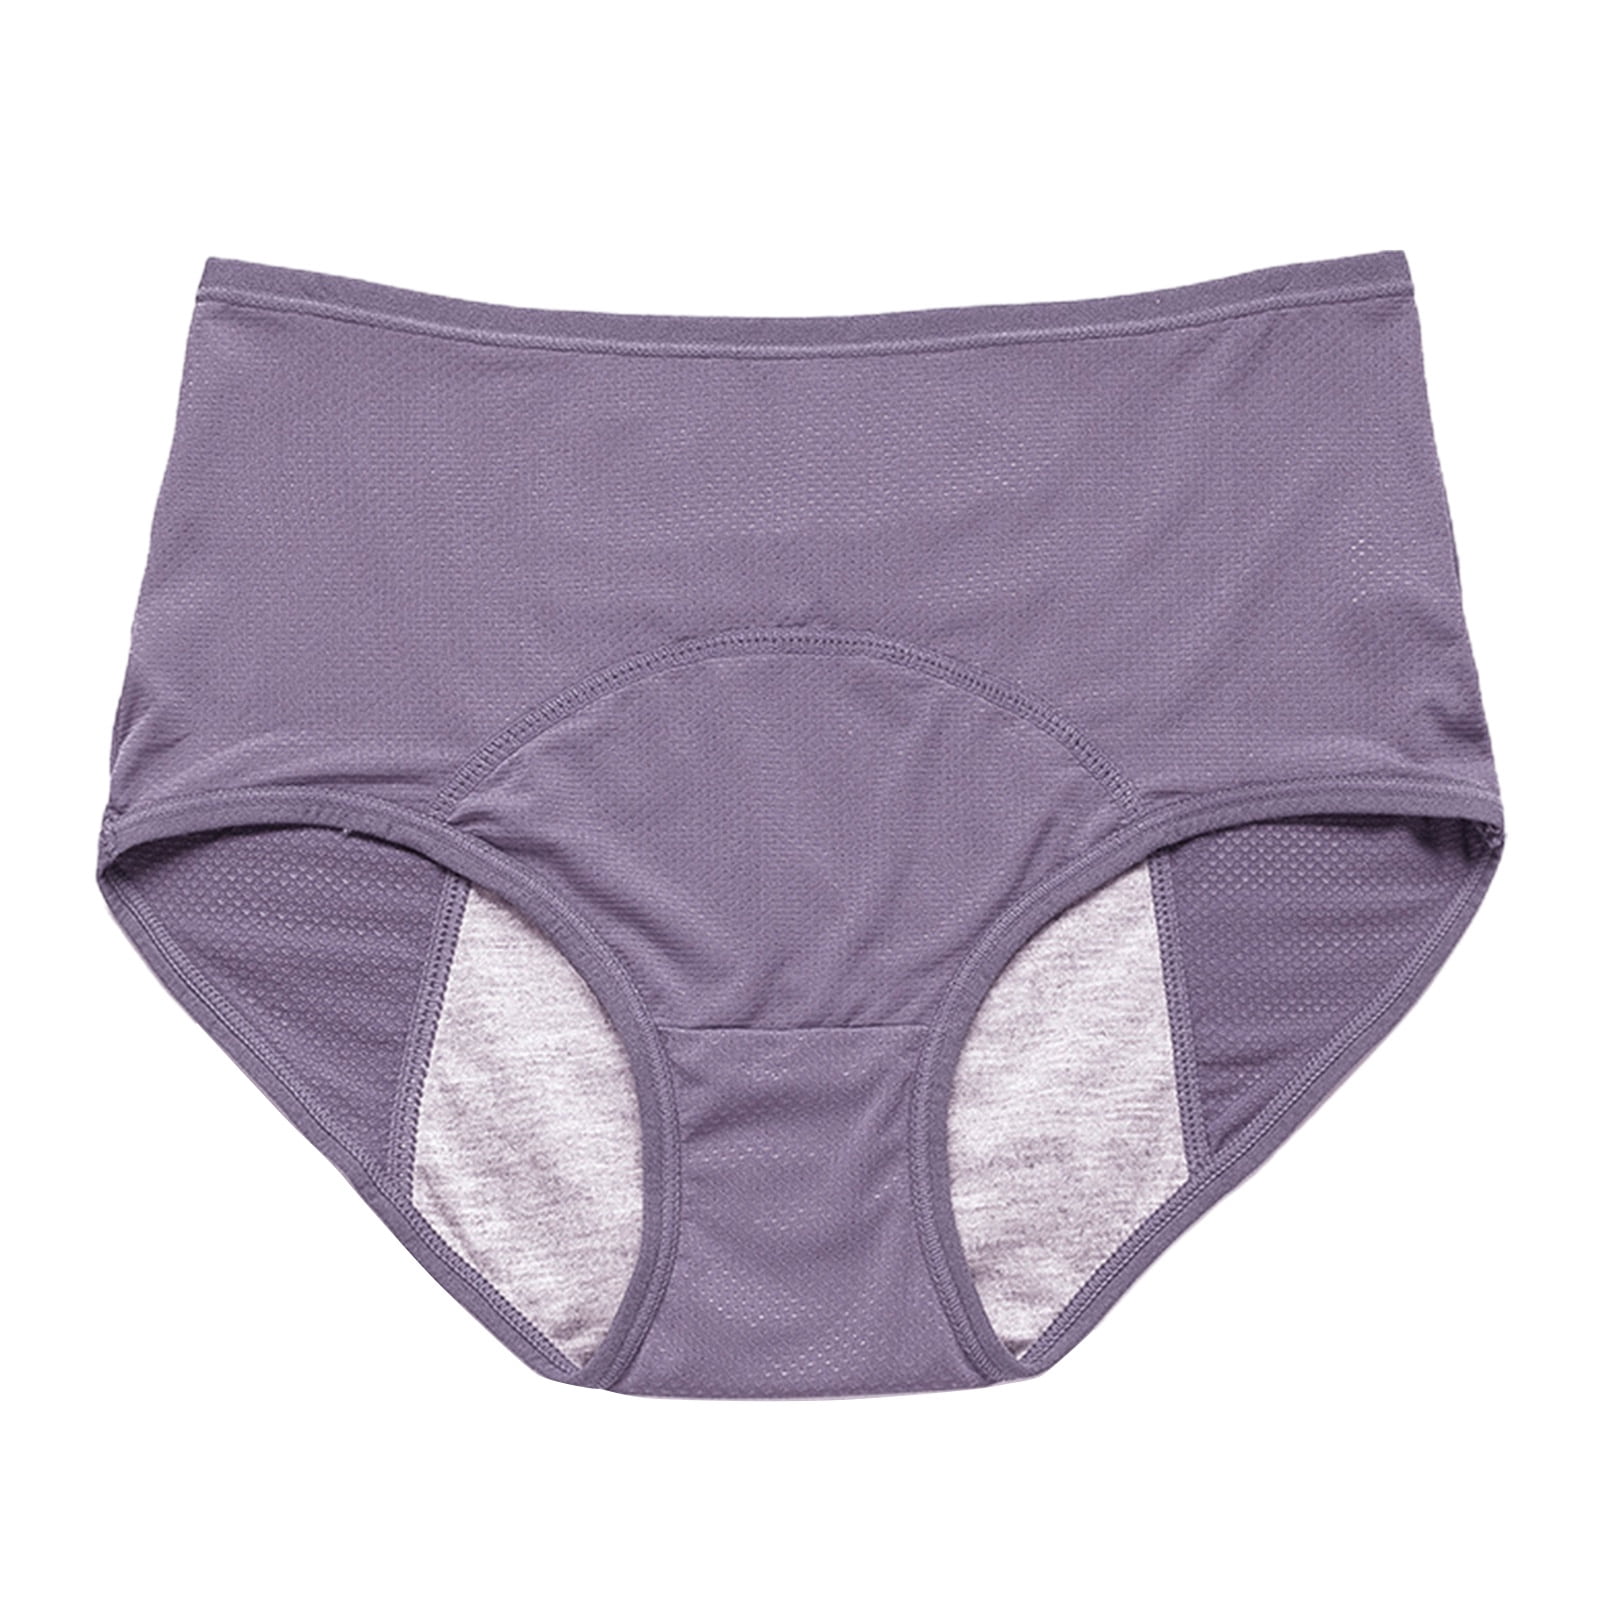 Women Underwear Panties,Crystal Rise Menstruation Briefs Mid Menstrual Extra Breathable Leak-proof High Purple,XL Stretchy Protection Rise